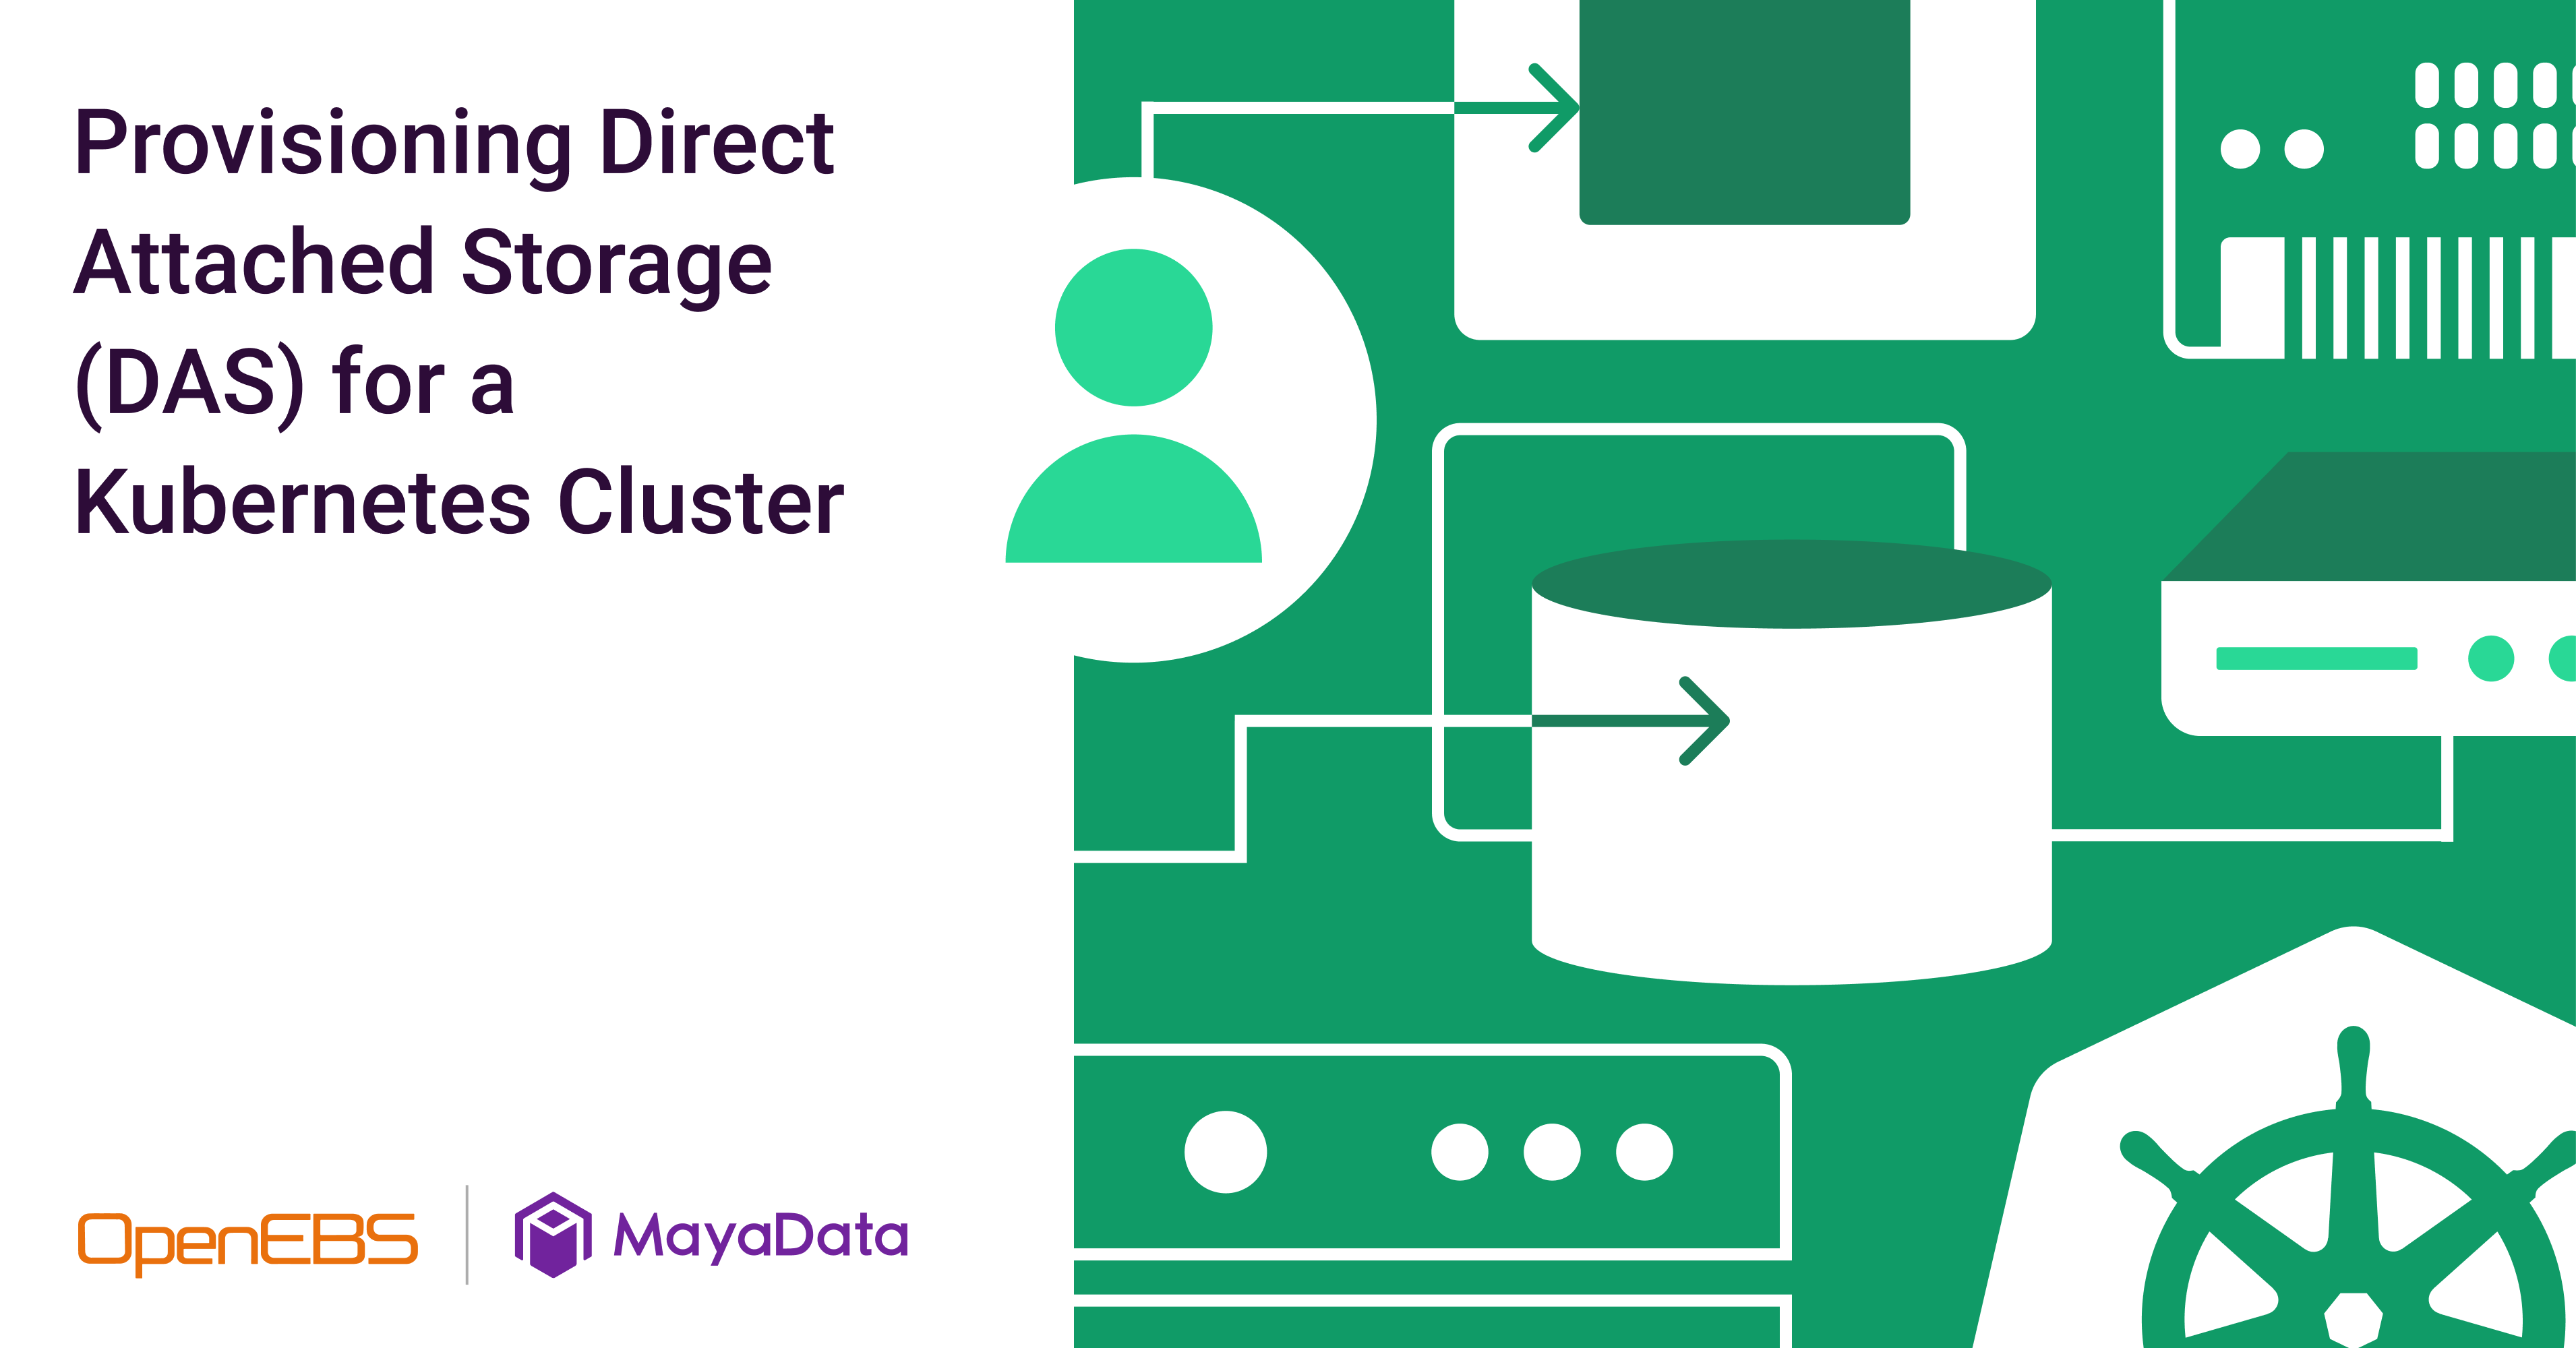 How to provision Direct Attached Storage (DAS) for a Cluster